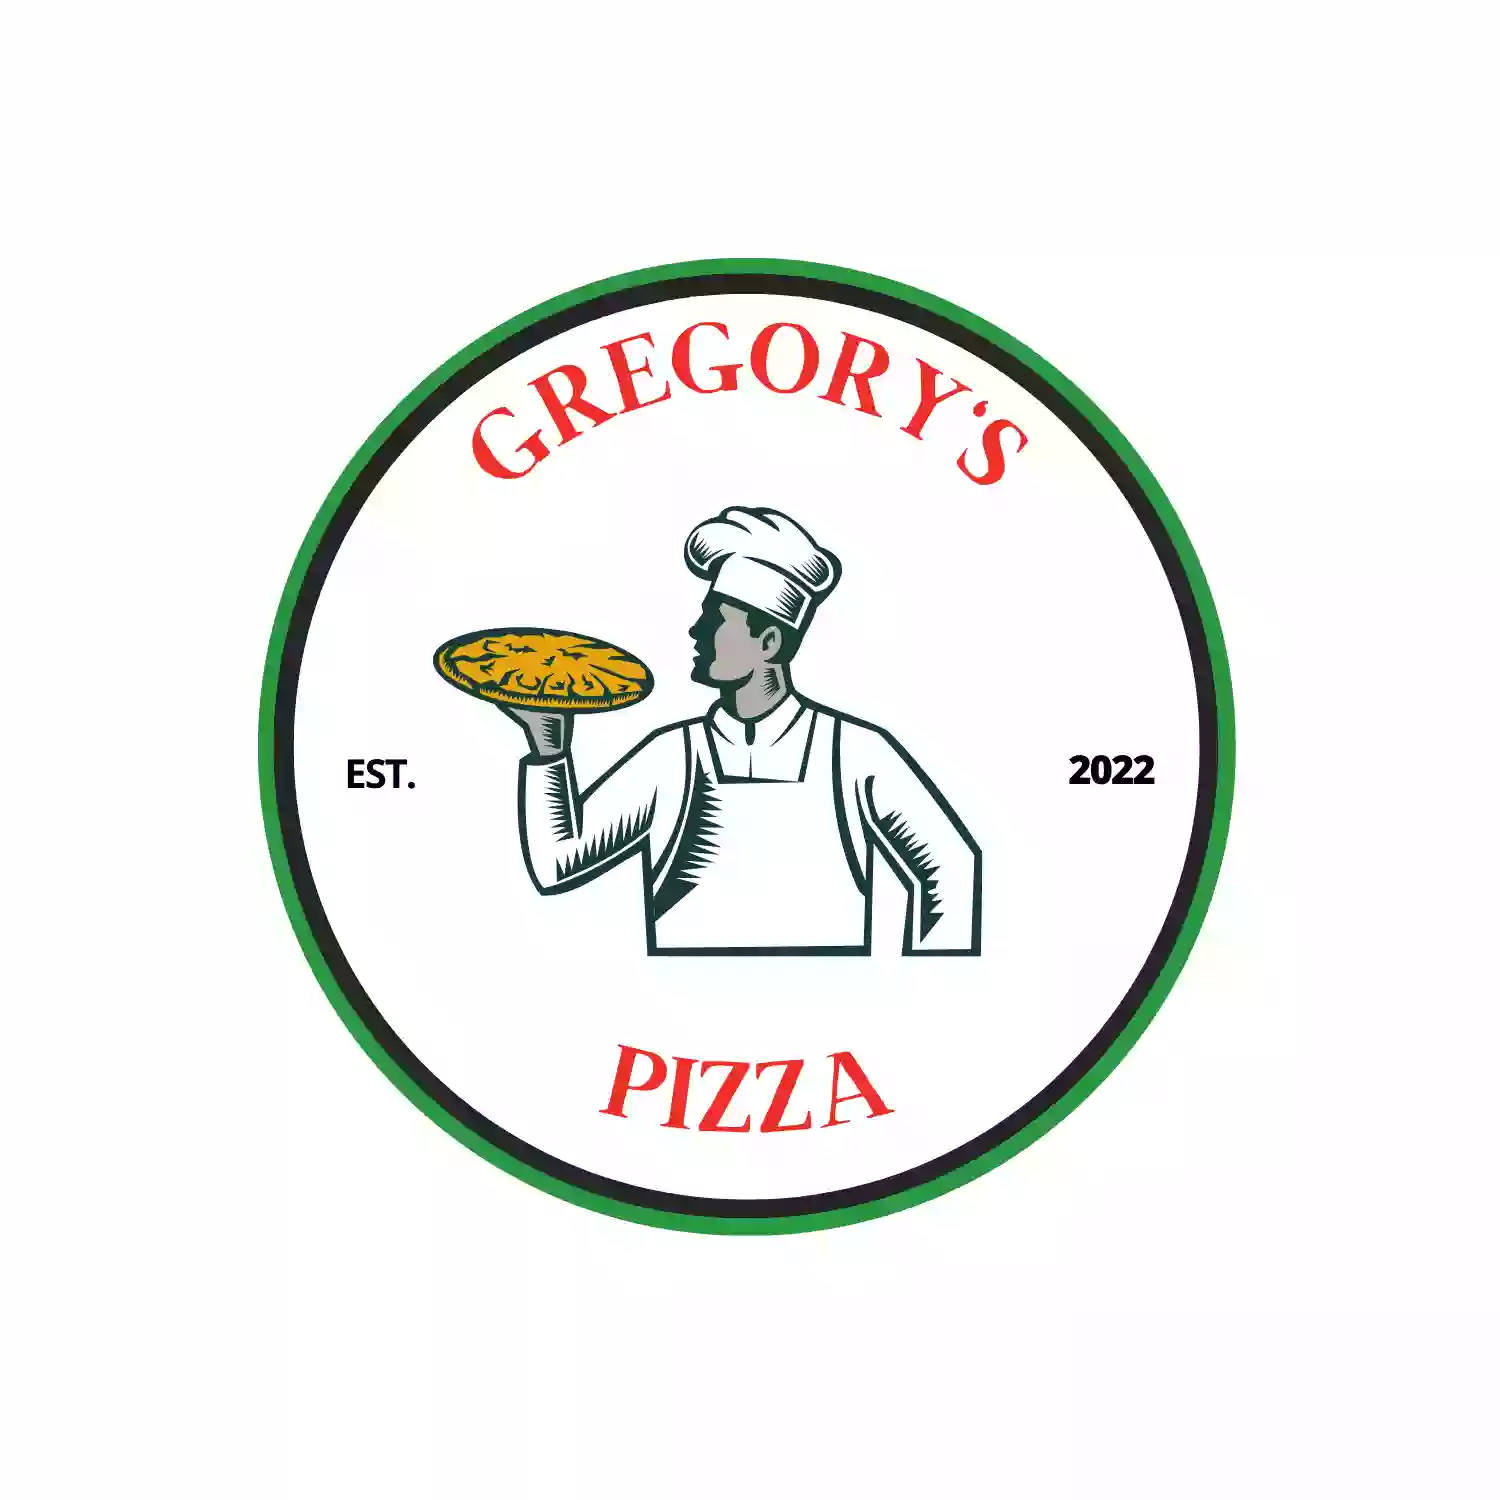 Gregory's Pizza